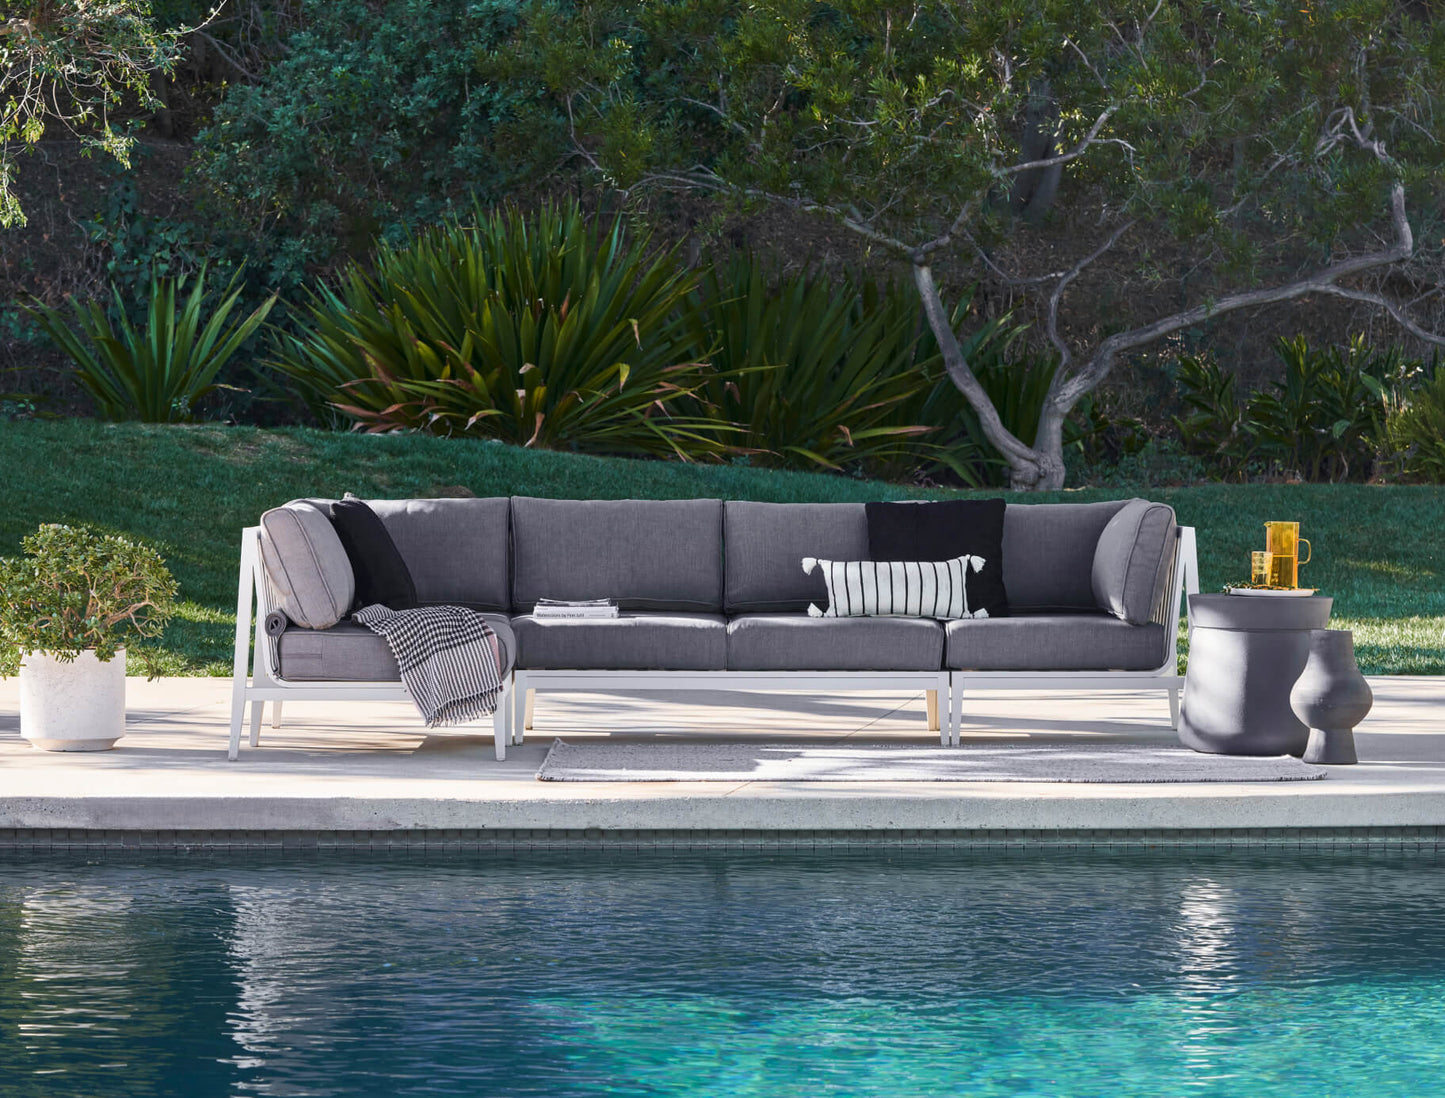 Live Outer 98" White Aluminum Outdoor Sofa With Armless Chairs and Dark Pebble Gray Cushion (5-Seat)